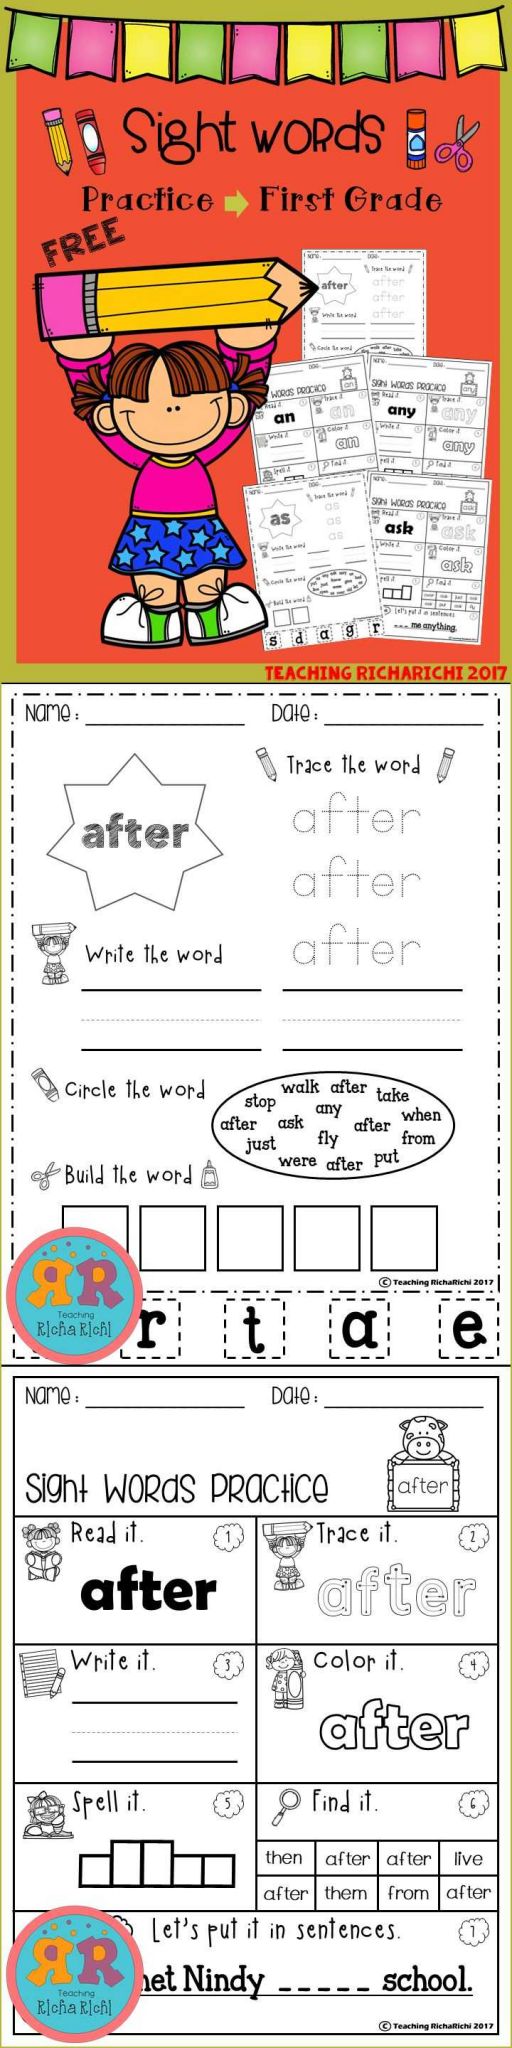 Recycling Worksheets for Kids together with 526 Best Awesome Art Music or Pe Tpt Resources Images On Pinterest